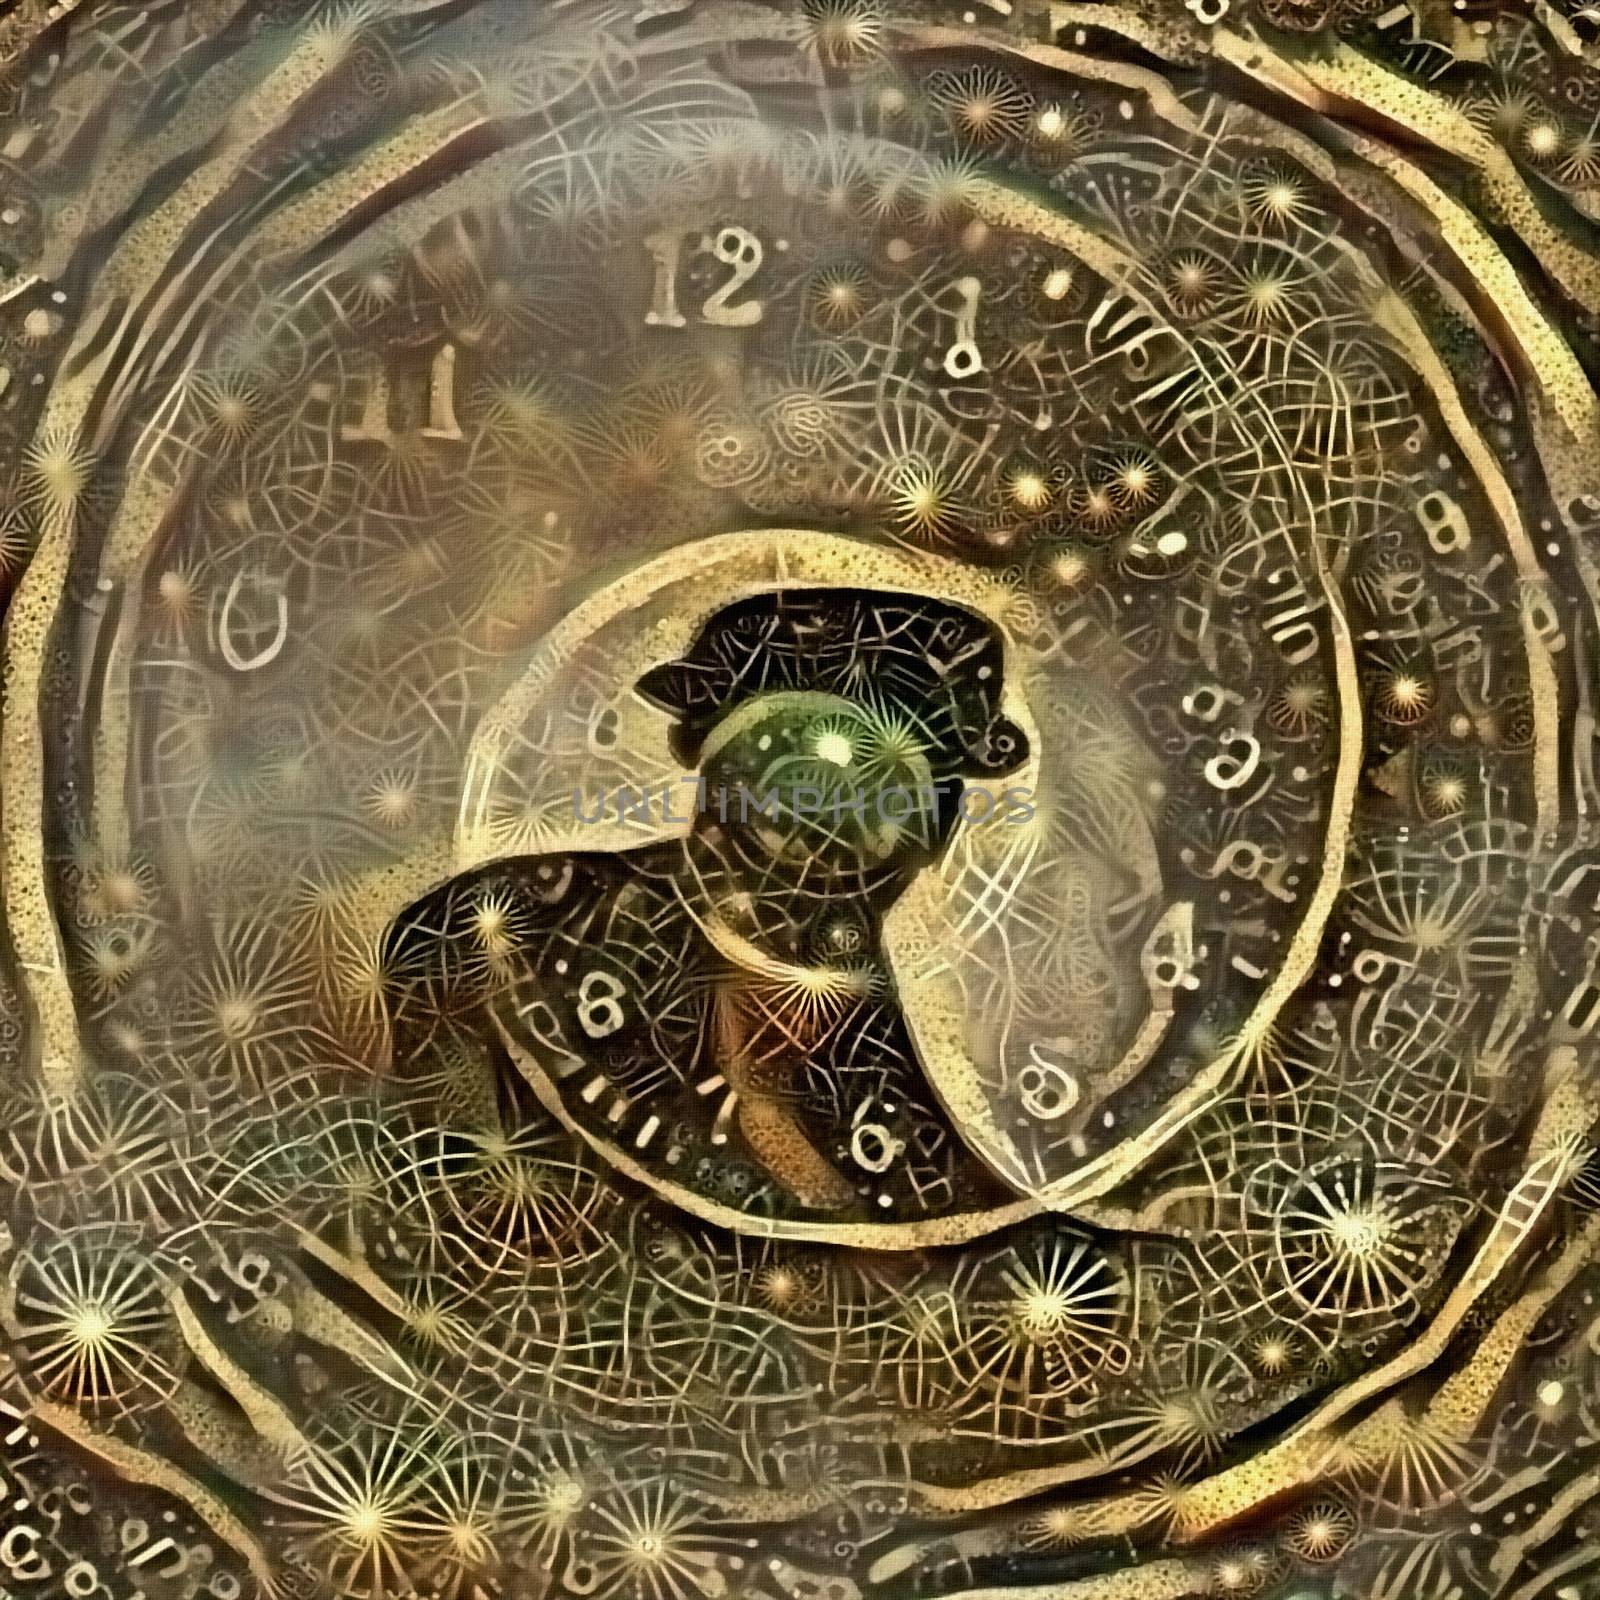 Man in black suit. Green apple face. Time spiral in vortex of stars